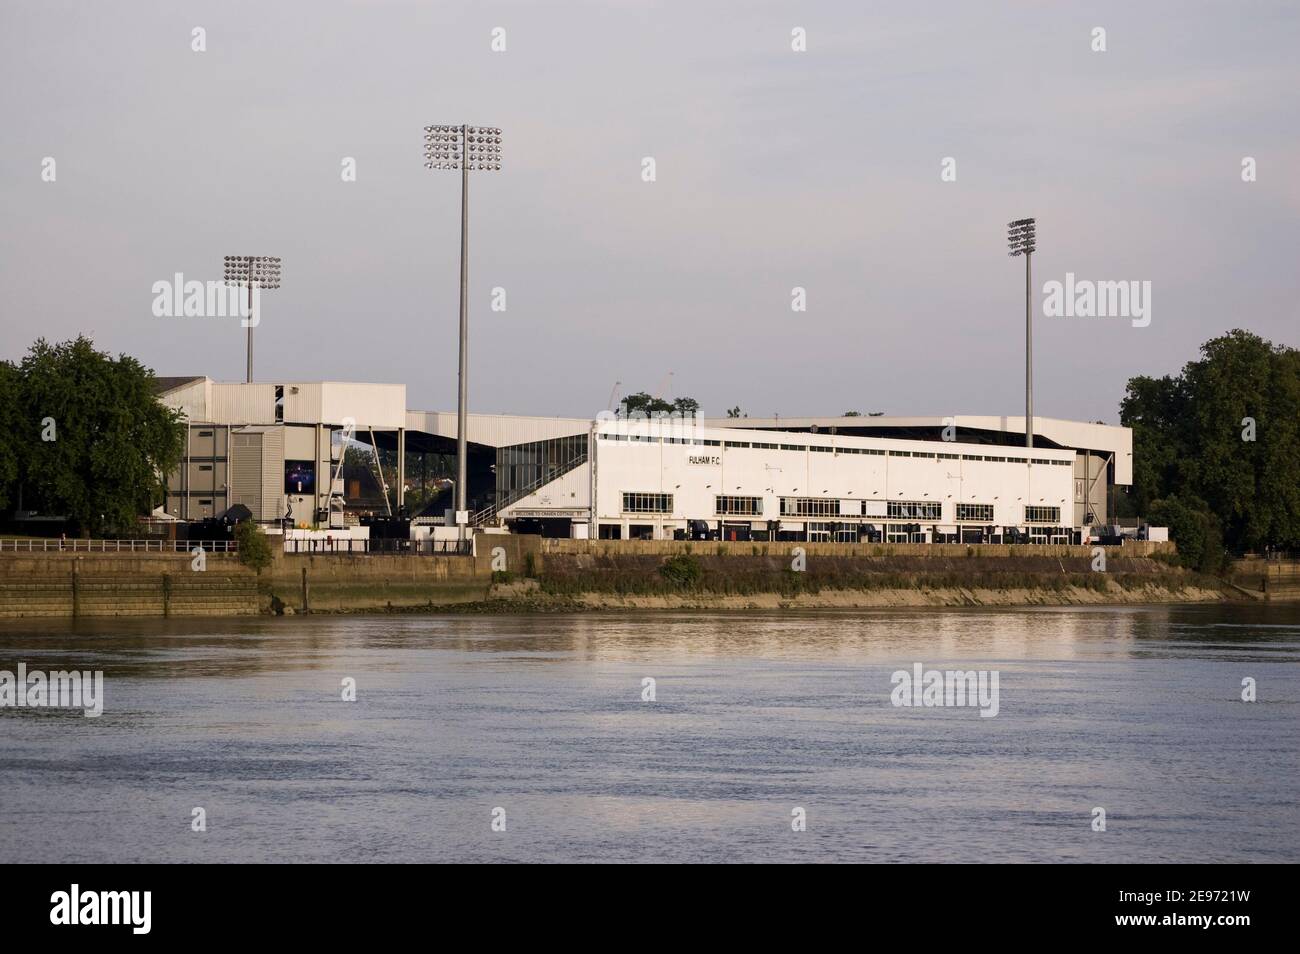 FULHAM, LONDON, ENGLAND - AUGUST 11: Craven Cottage, Fulham Football Club's home ground on August 11 2012. The Club has just received permission to ex Stock Photo